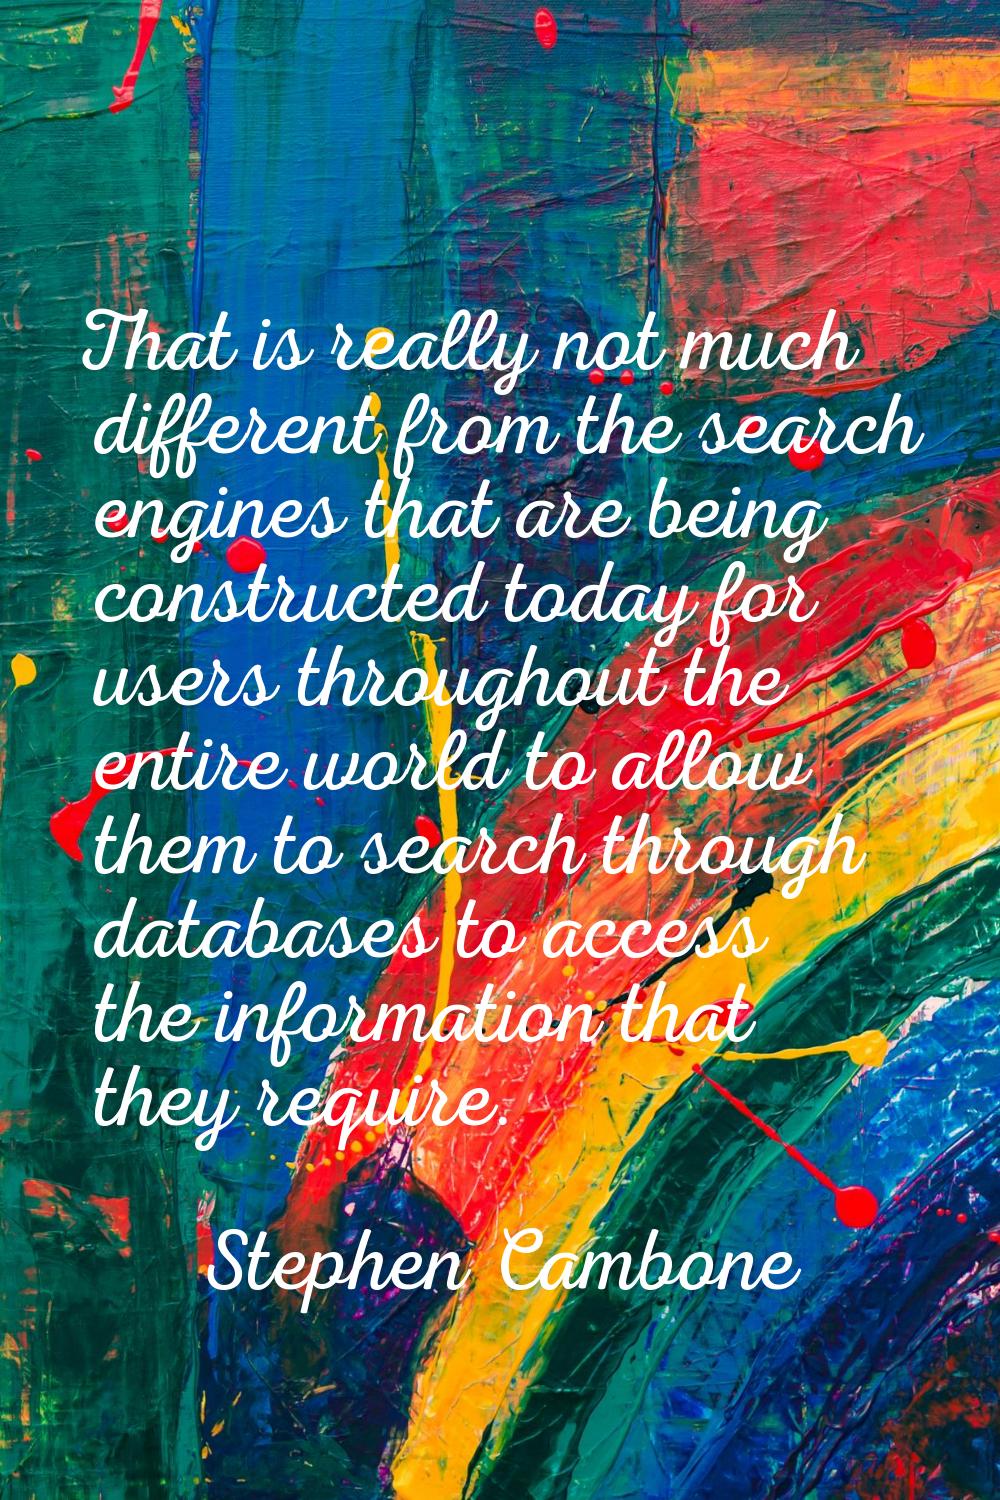 That is really not much different from the search engines that are being constructed today for user